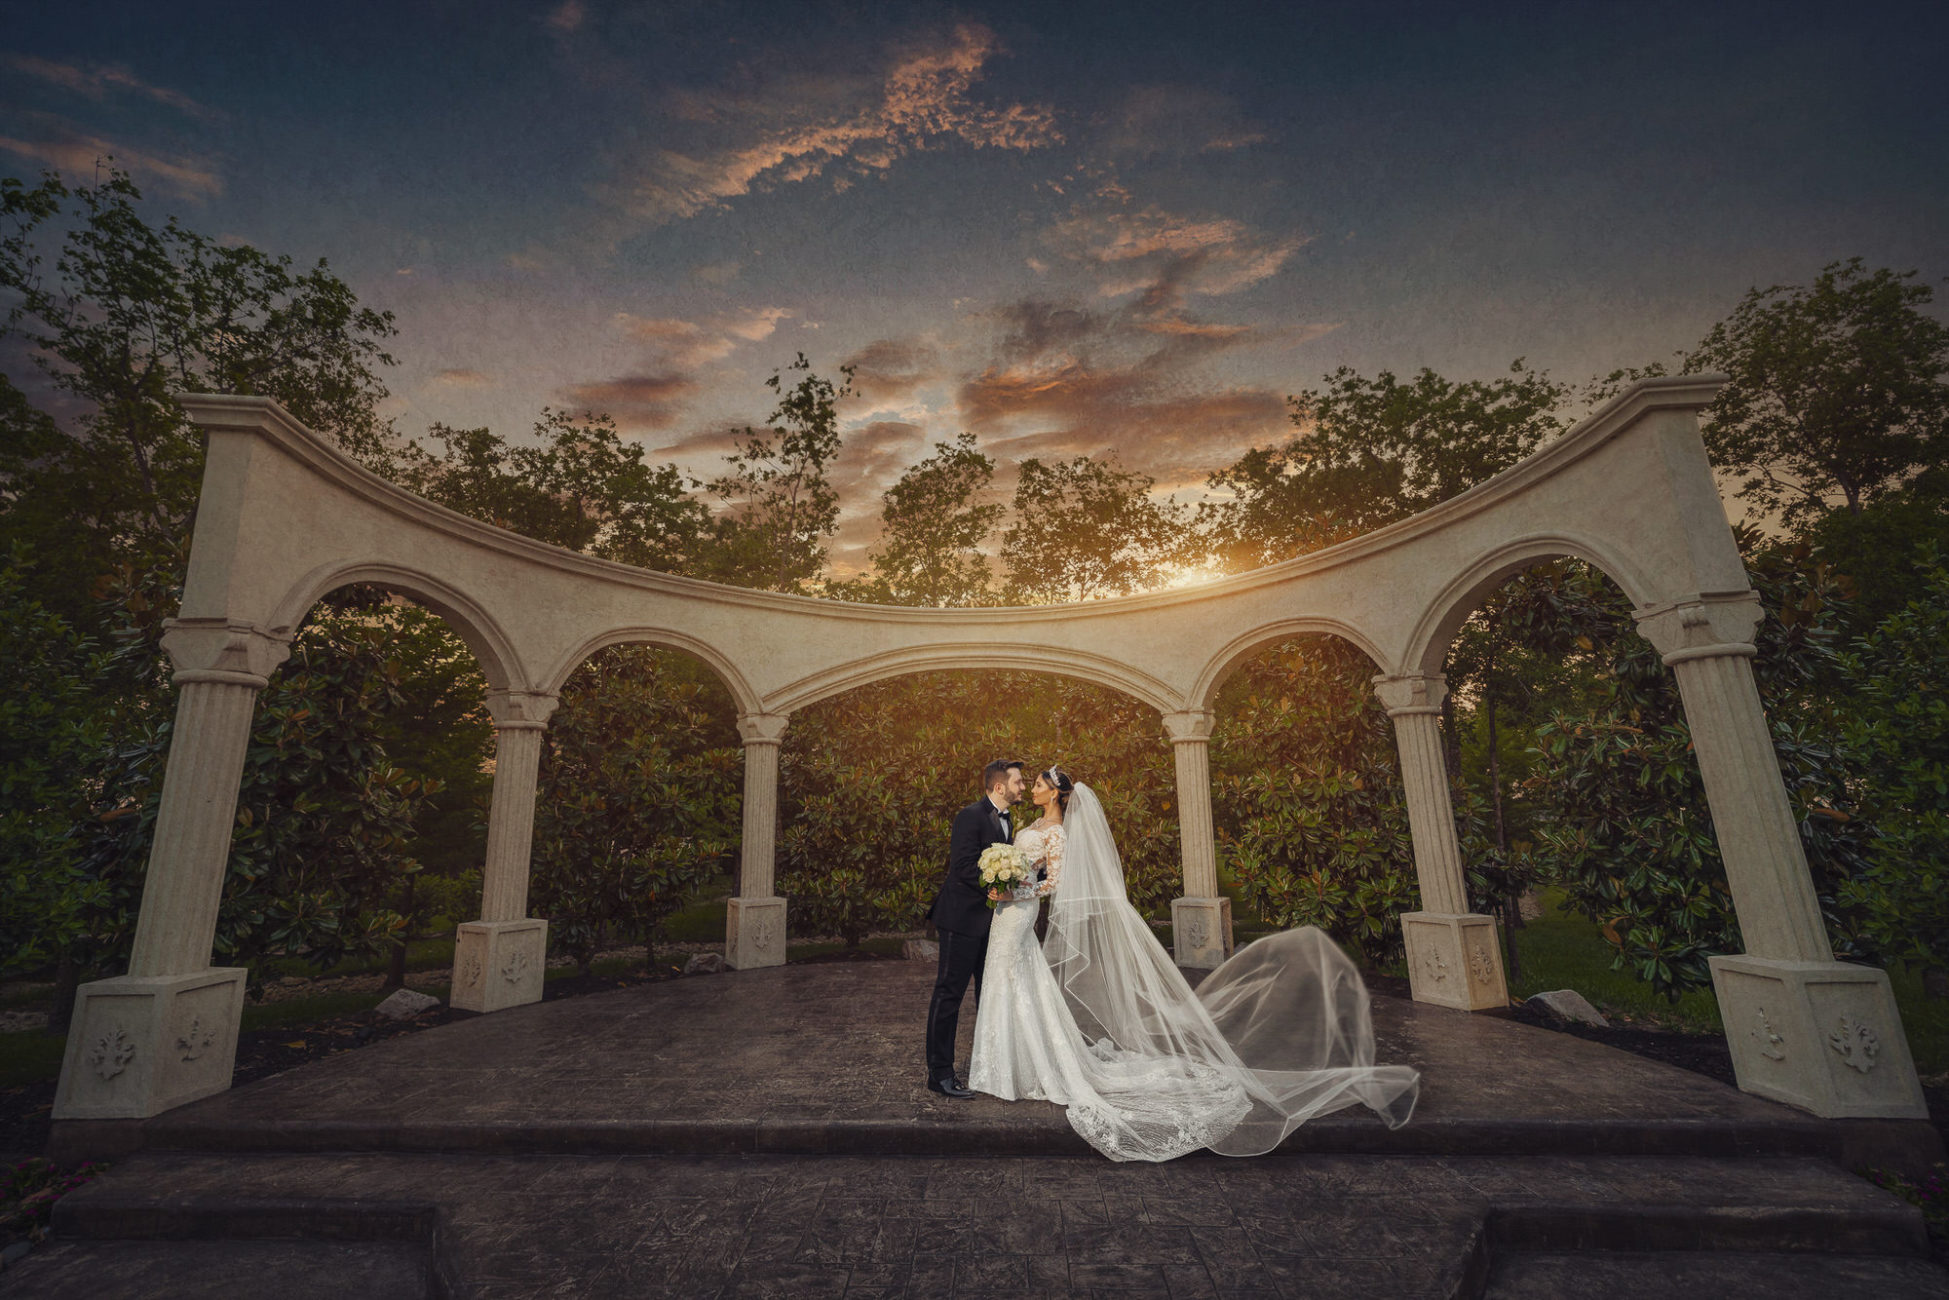 Bride and groom sunset photo at knotting hill place texas